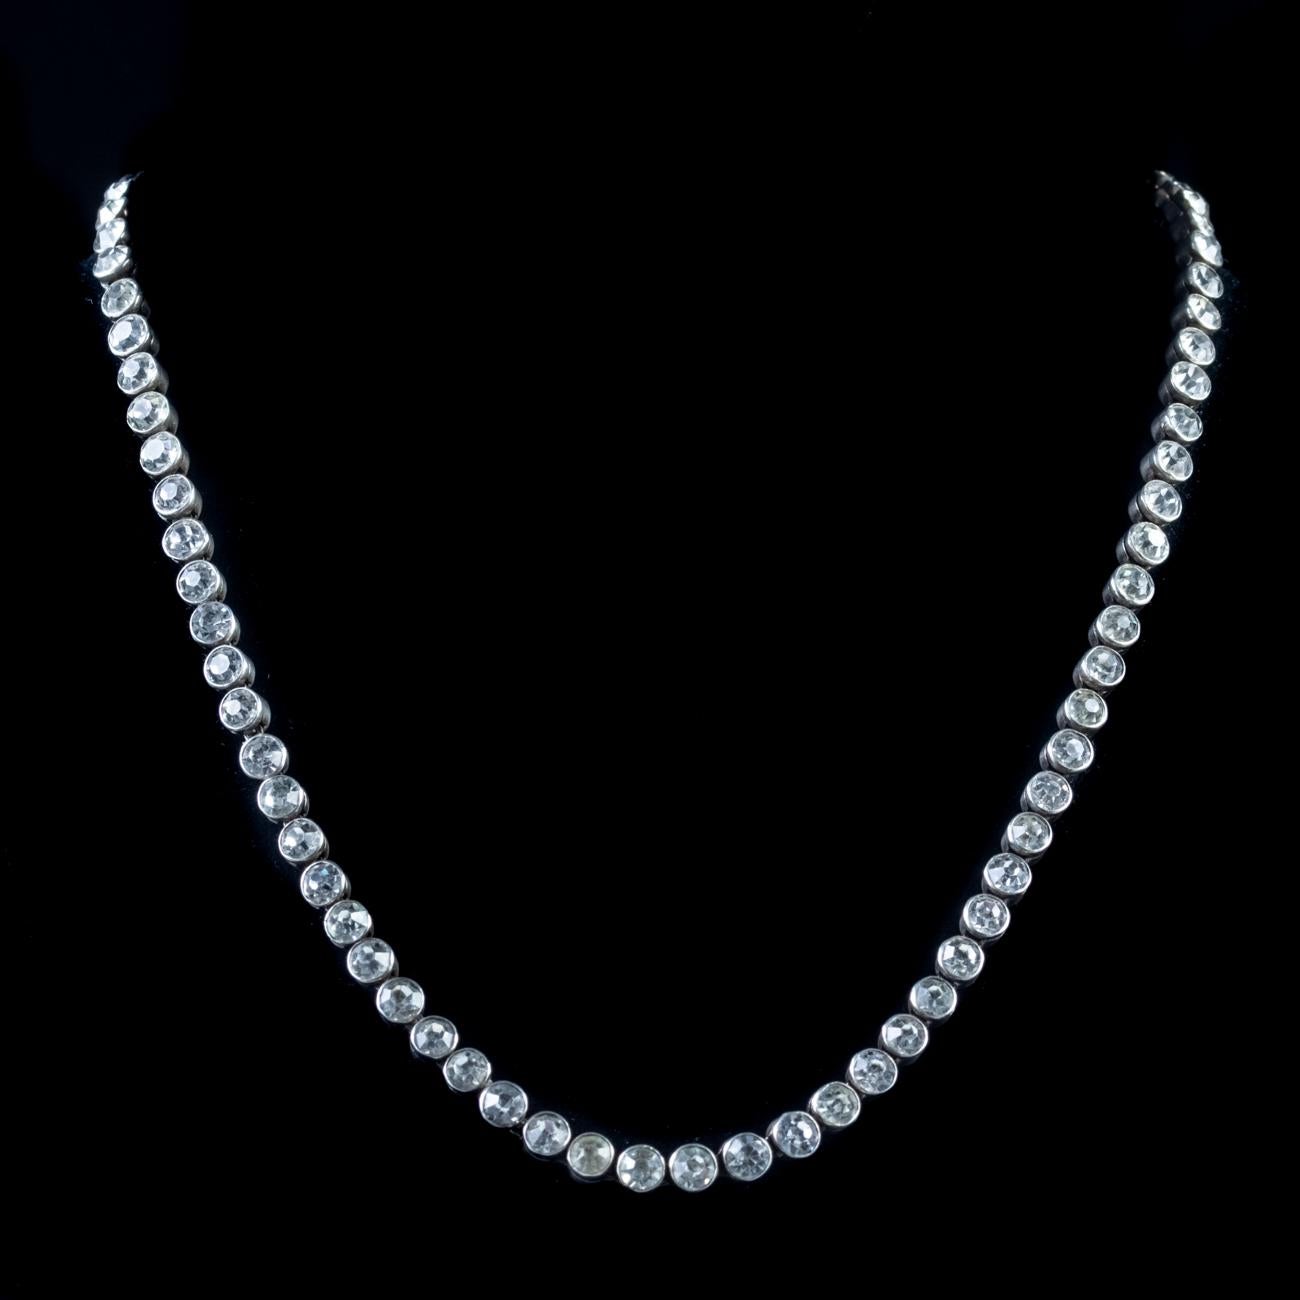 This elegant Antique Edwardian collar necklace has been modelled in Sterling Silver and each link is set with a dazzling Paste stone weighing approx. 0.15ct.

Paste is a heavy, transparent flint glass that simulates the fire and brilliance of